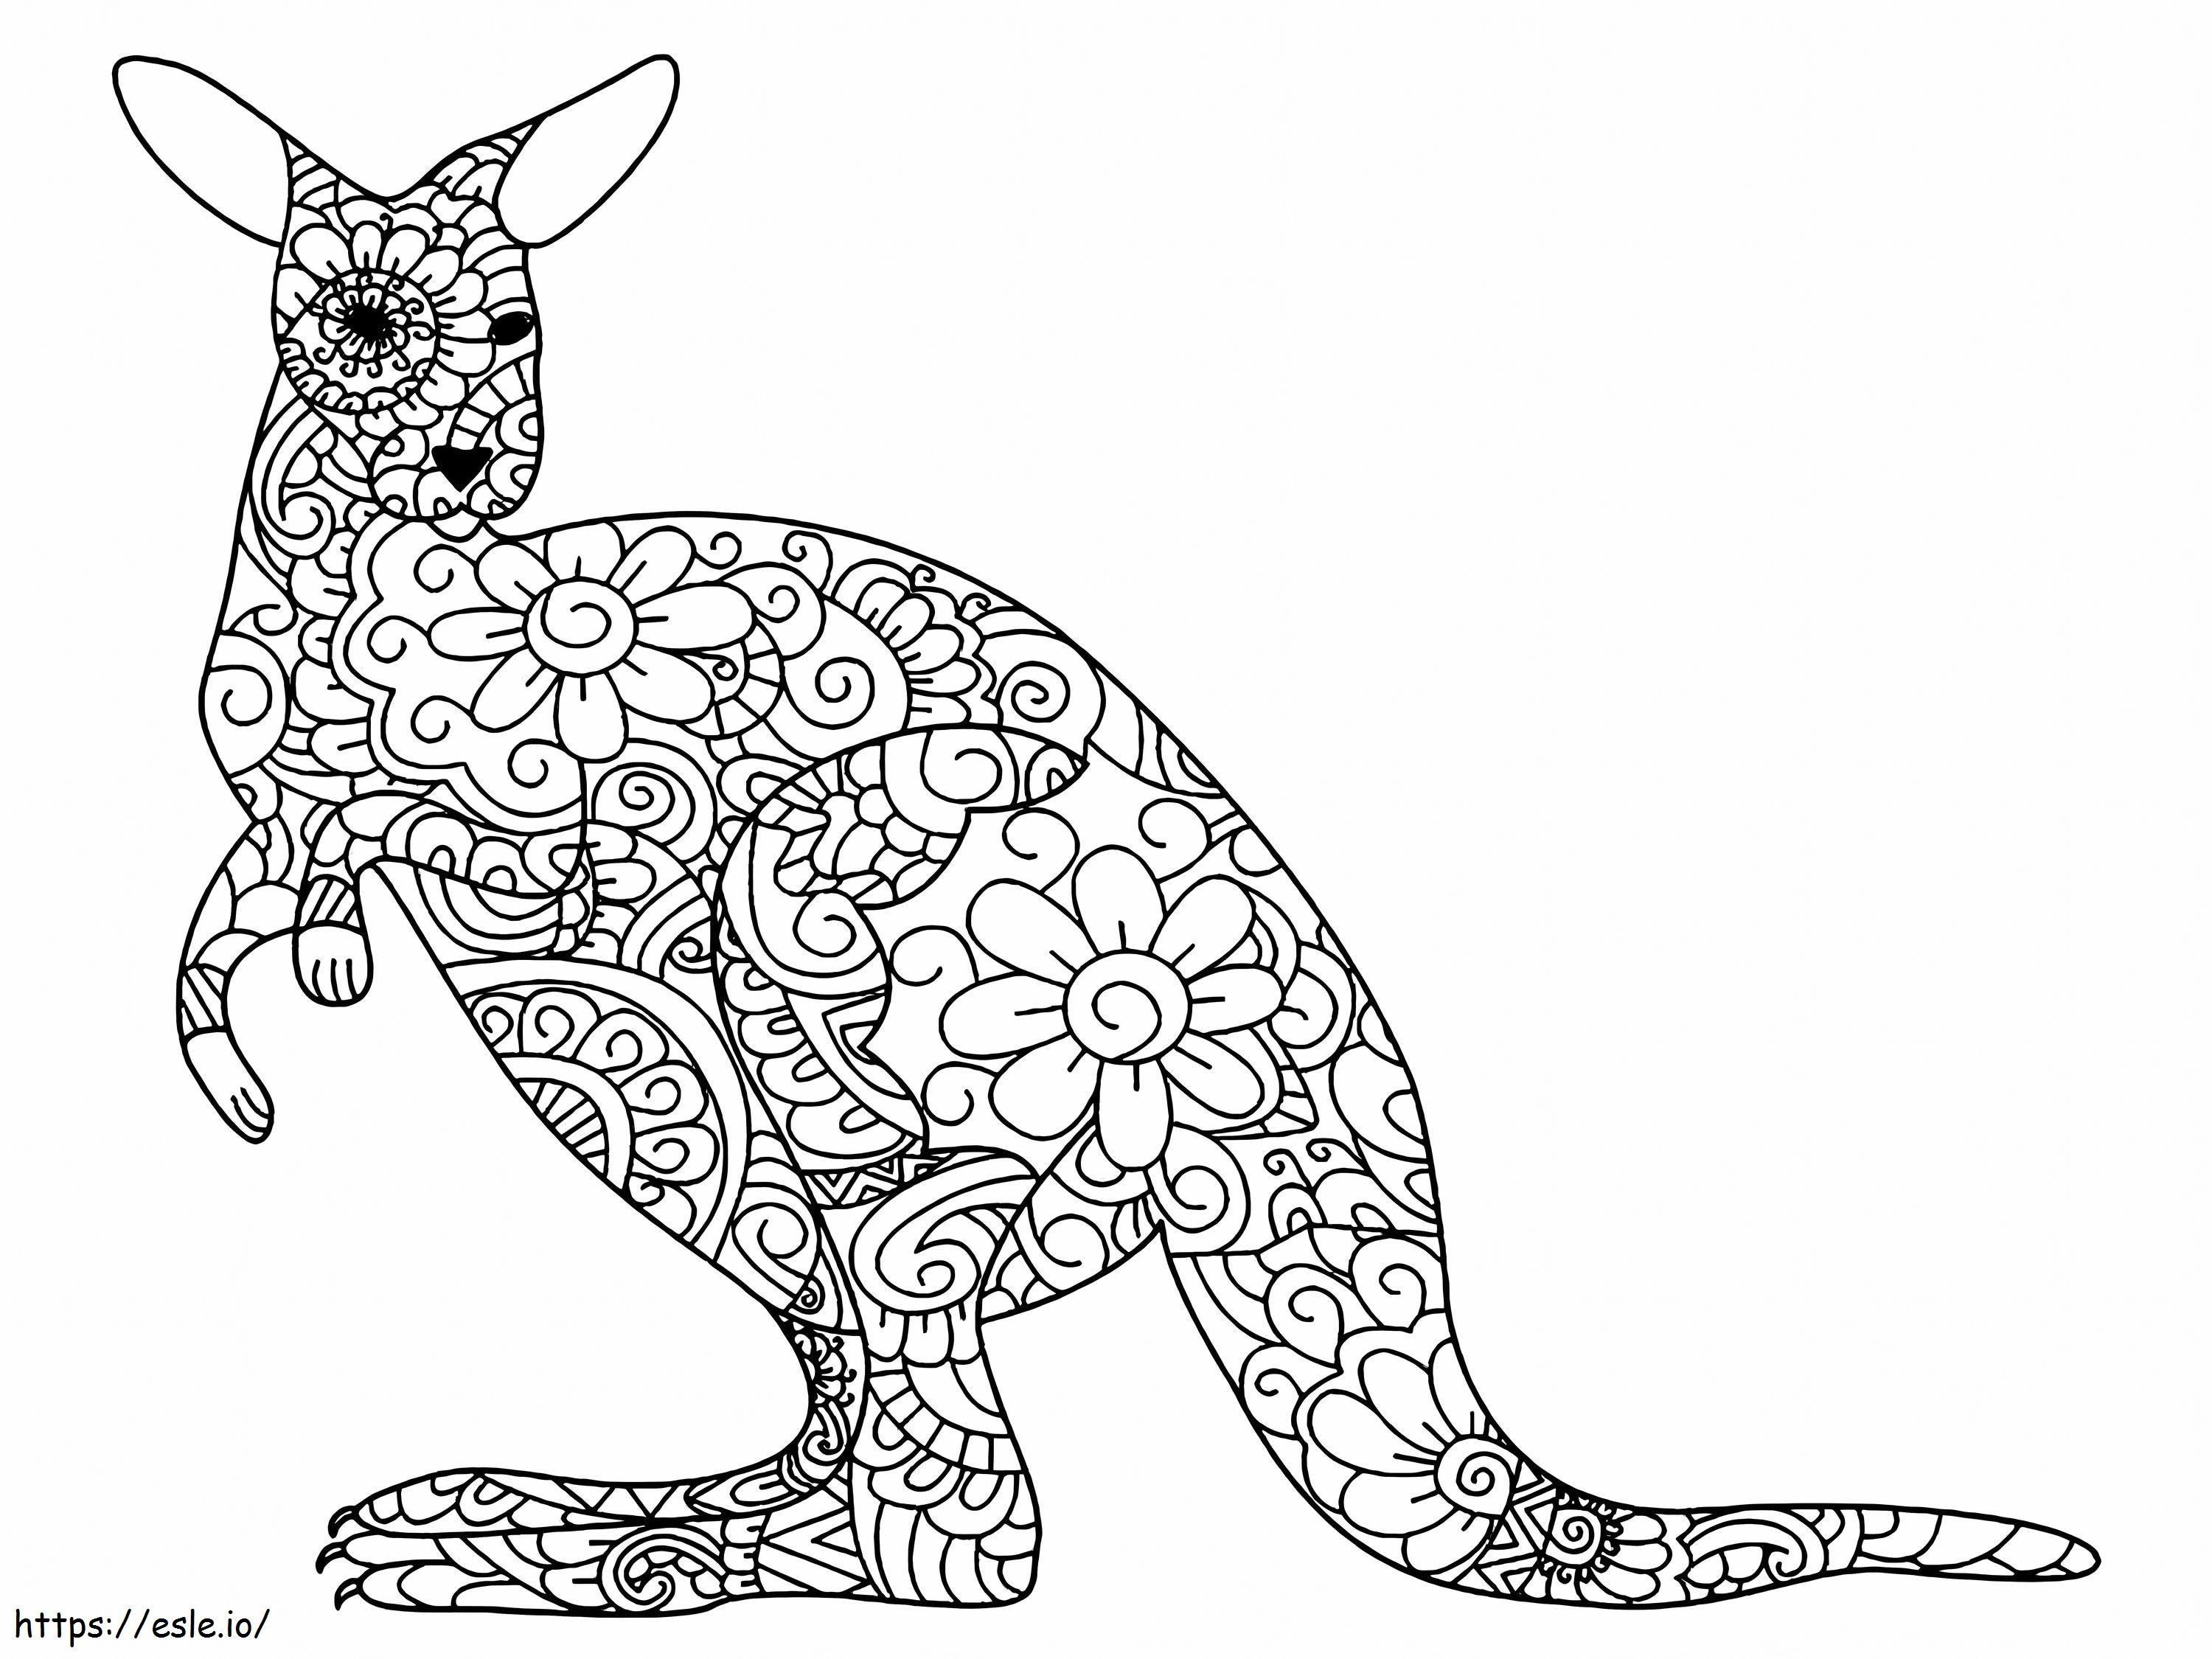 Kangaroo Is For Adults coloring page